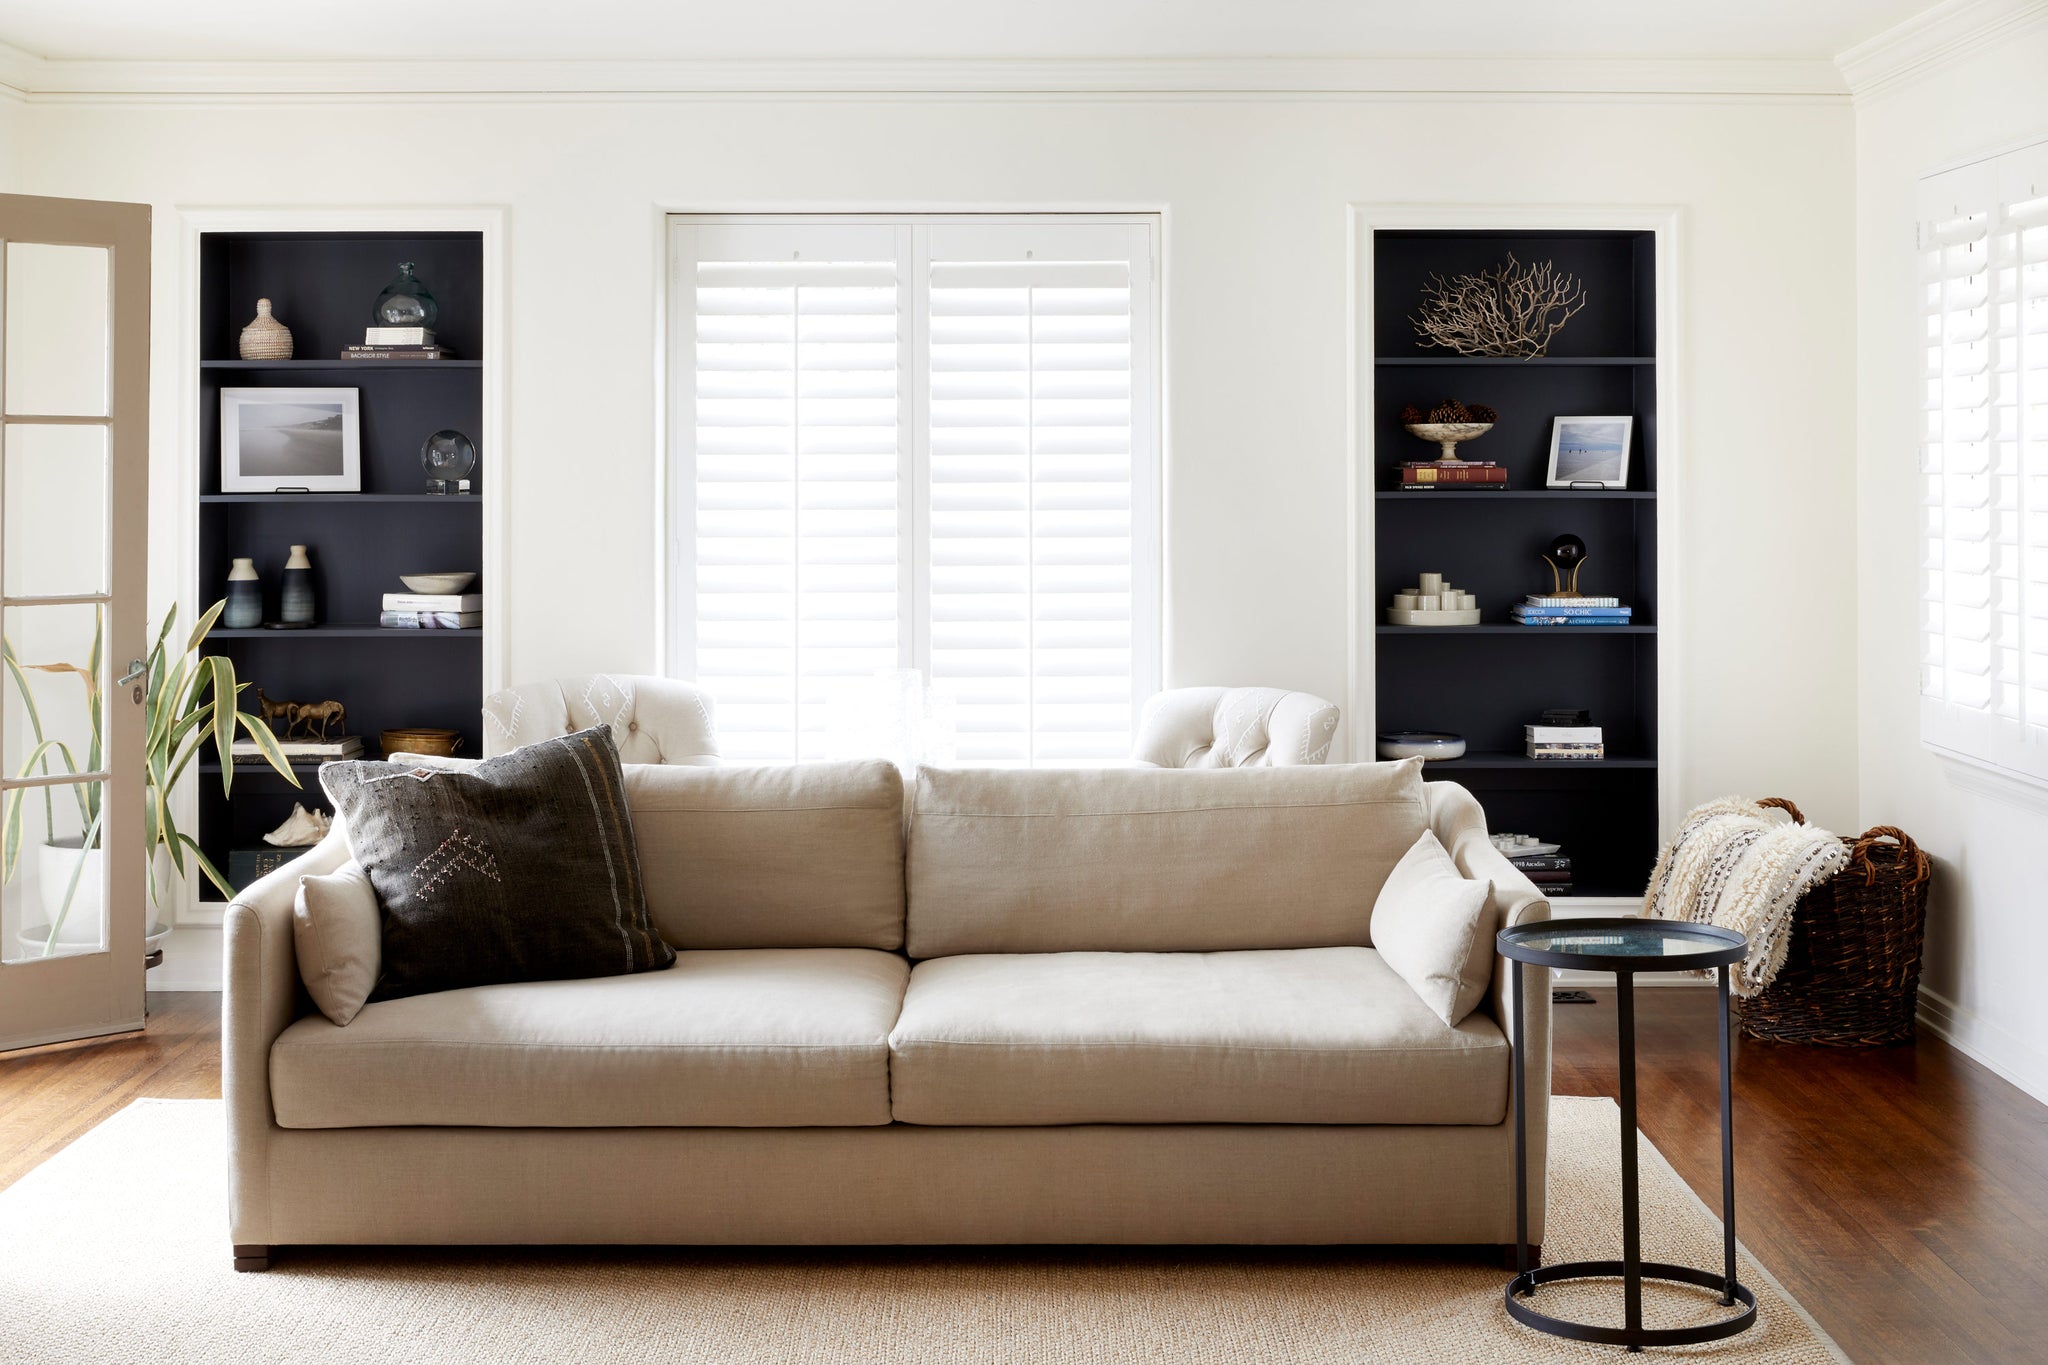  Daylight in a white living room with 2 black bookcases on the back wall. The sofa is in a natural color fabric with a round side table to the right. Photographed in Brevard Burlap 